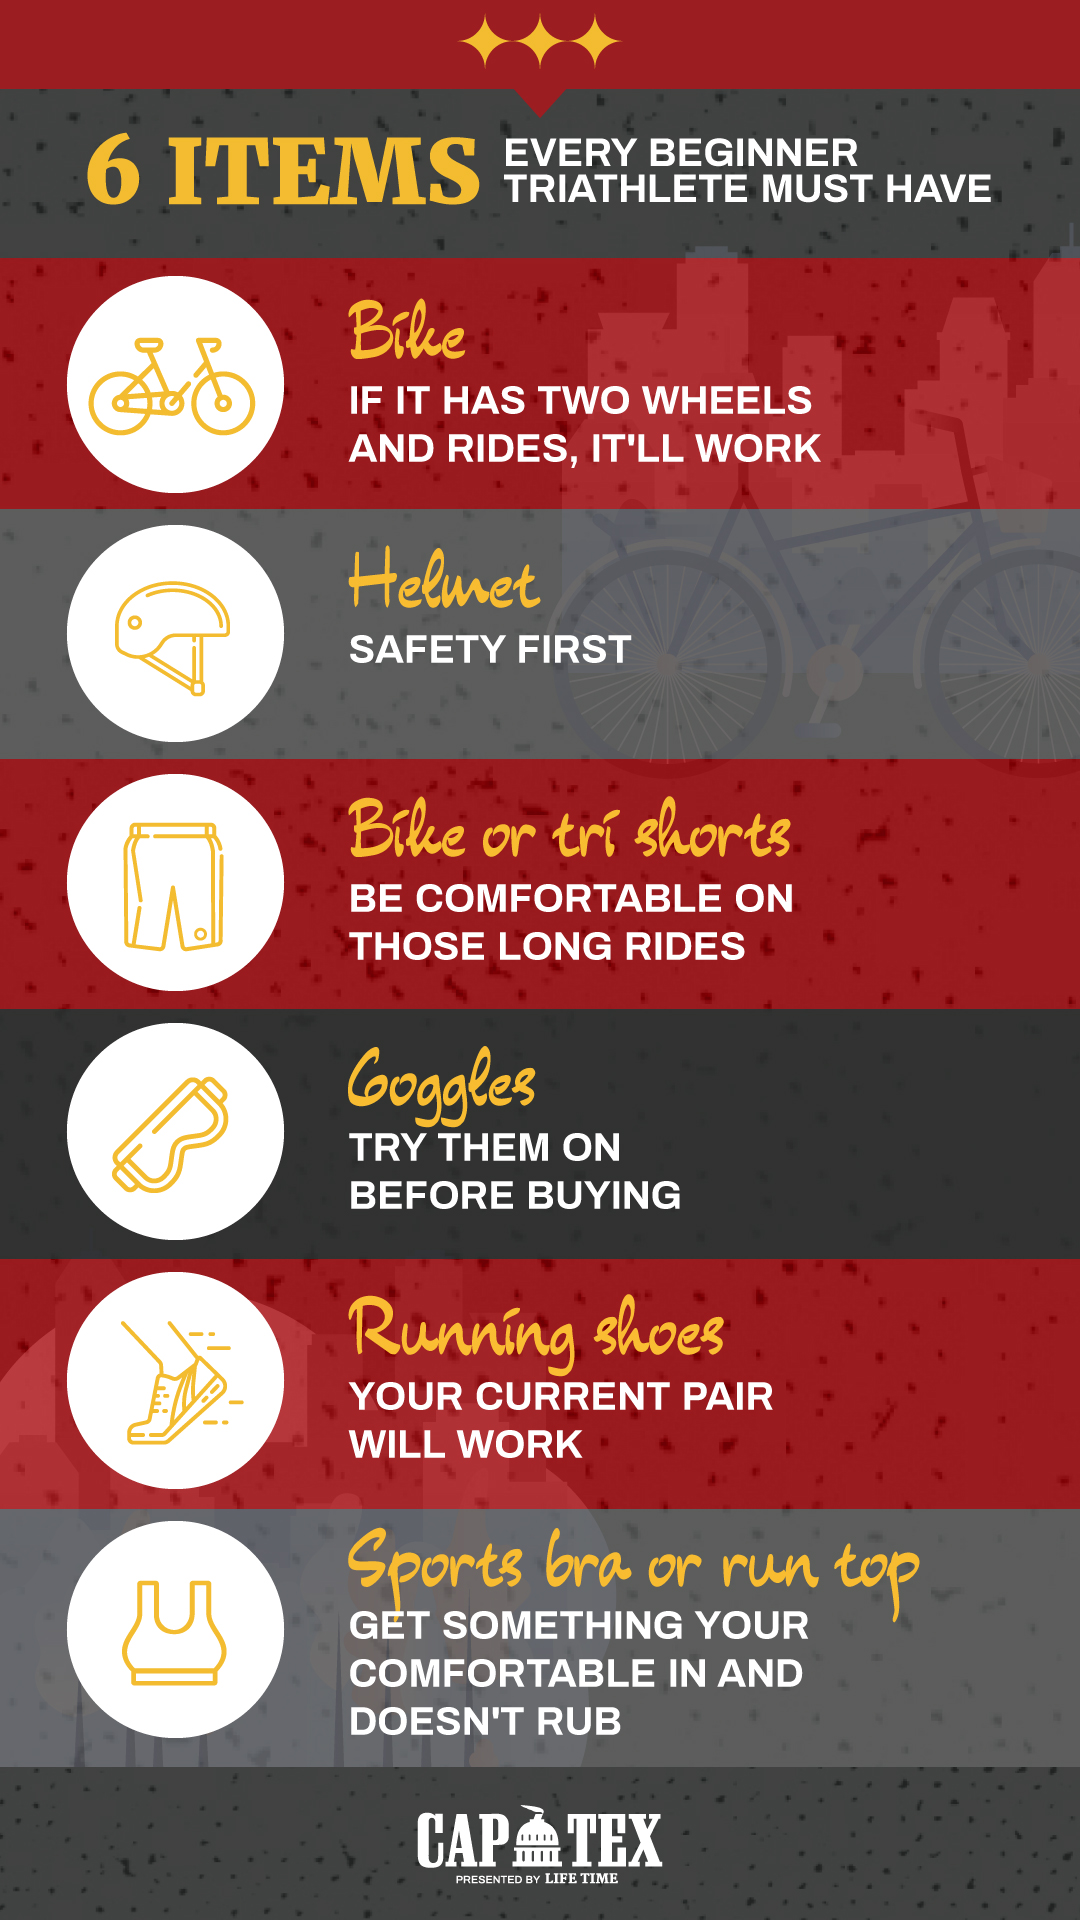 Infographic listing the 6 items every beginner triathlete must have. List includes bike, helmet, tri shorts, goggles, running shoes, and sports bra. Read more at https://captextri.com/6-items-beginner-triathlete/